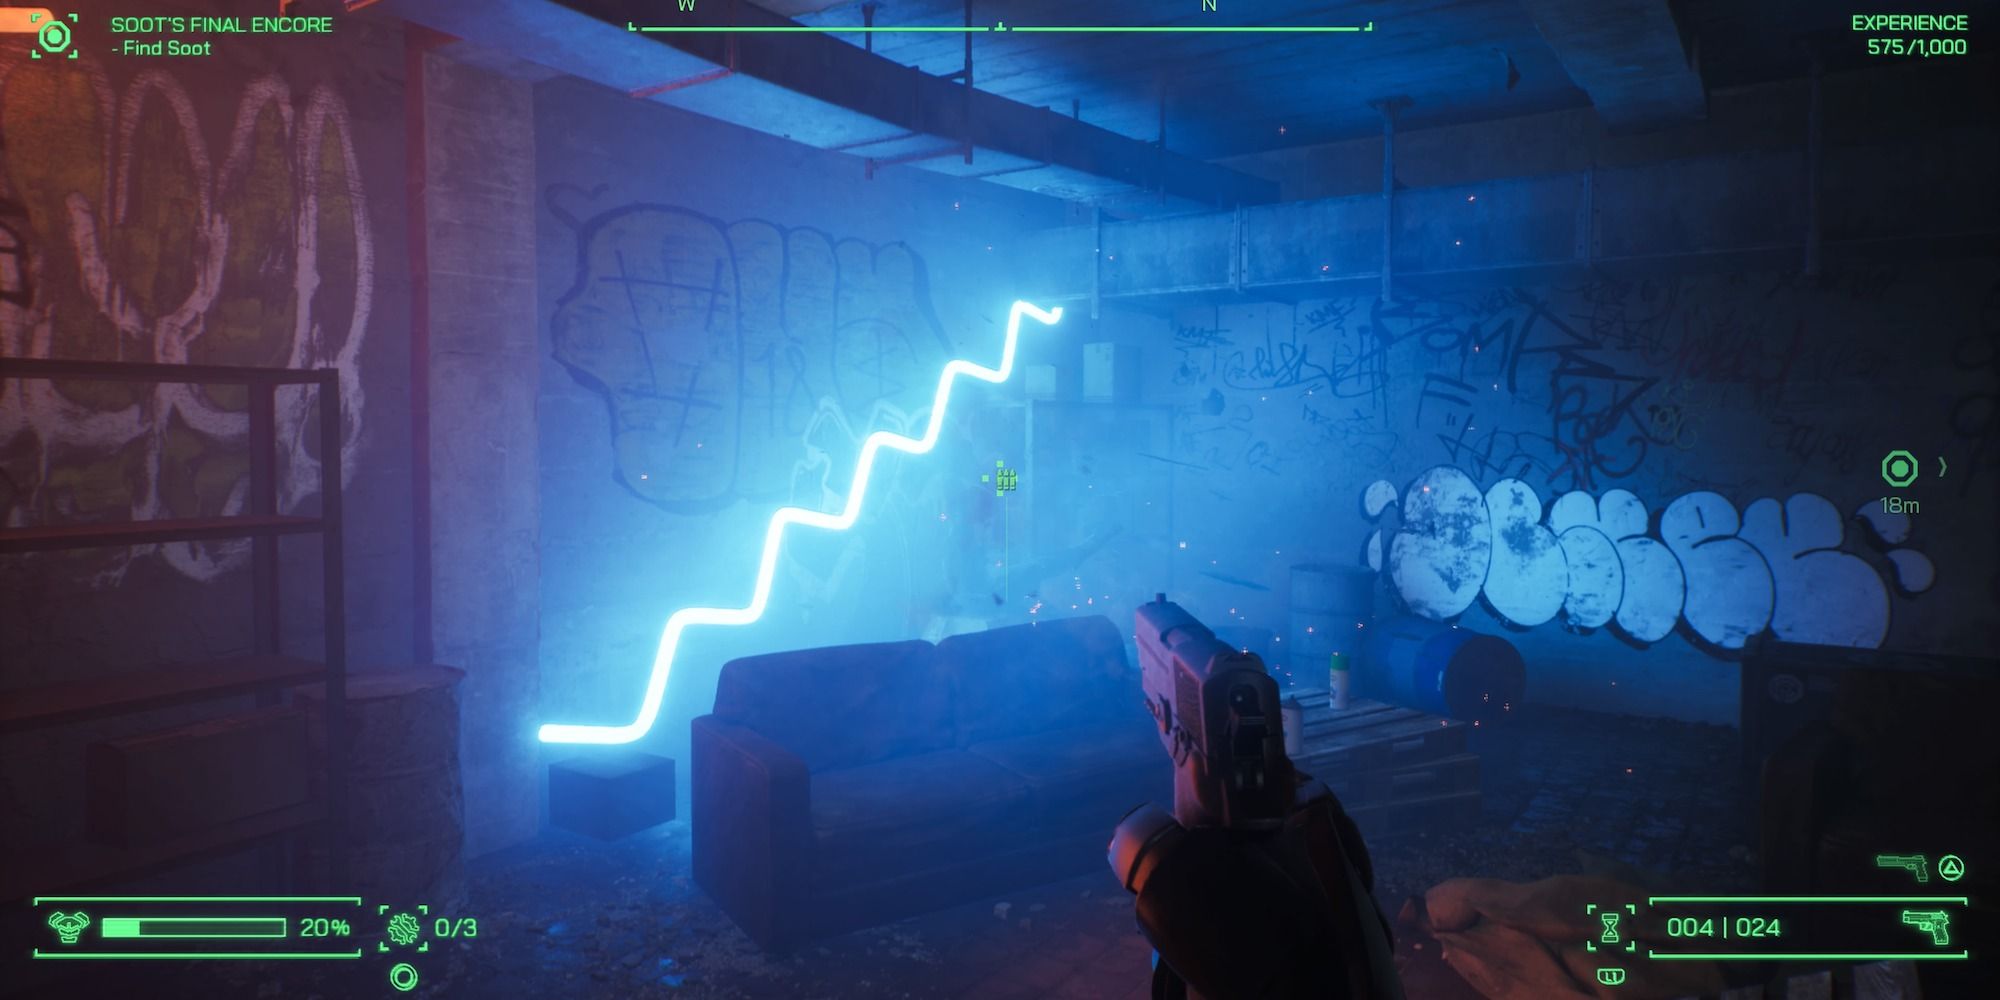 Aiming at a wall with a blue neon light